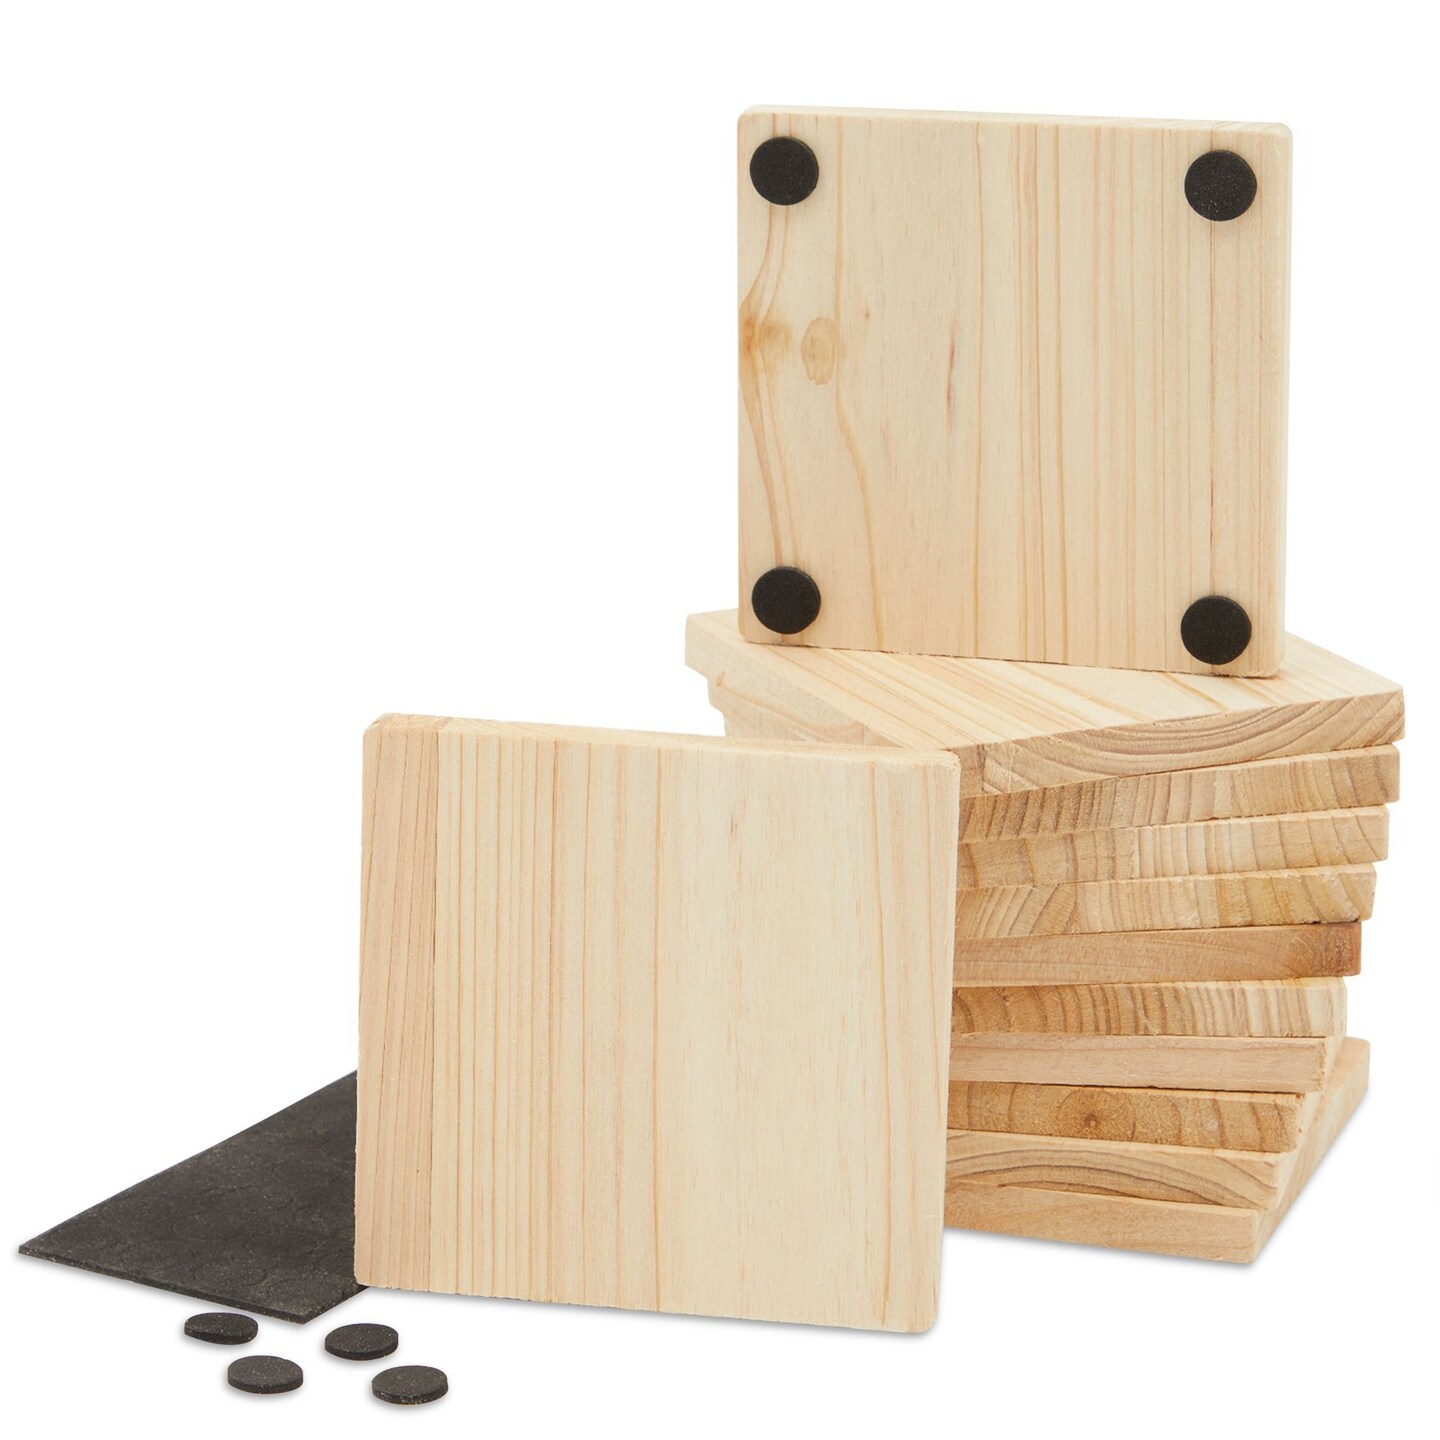 Unfinished Wood Coasters Bulk. Great for DIY craft projects.